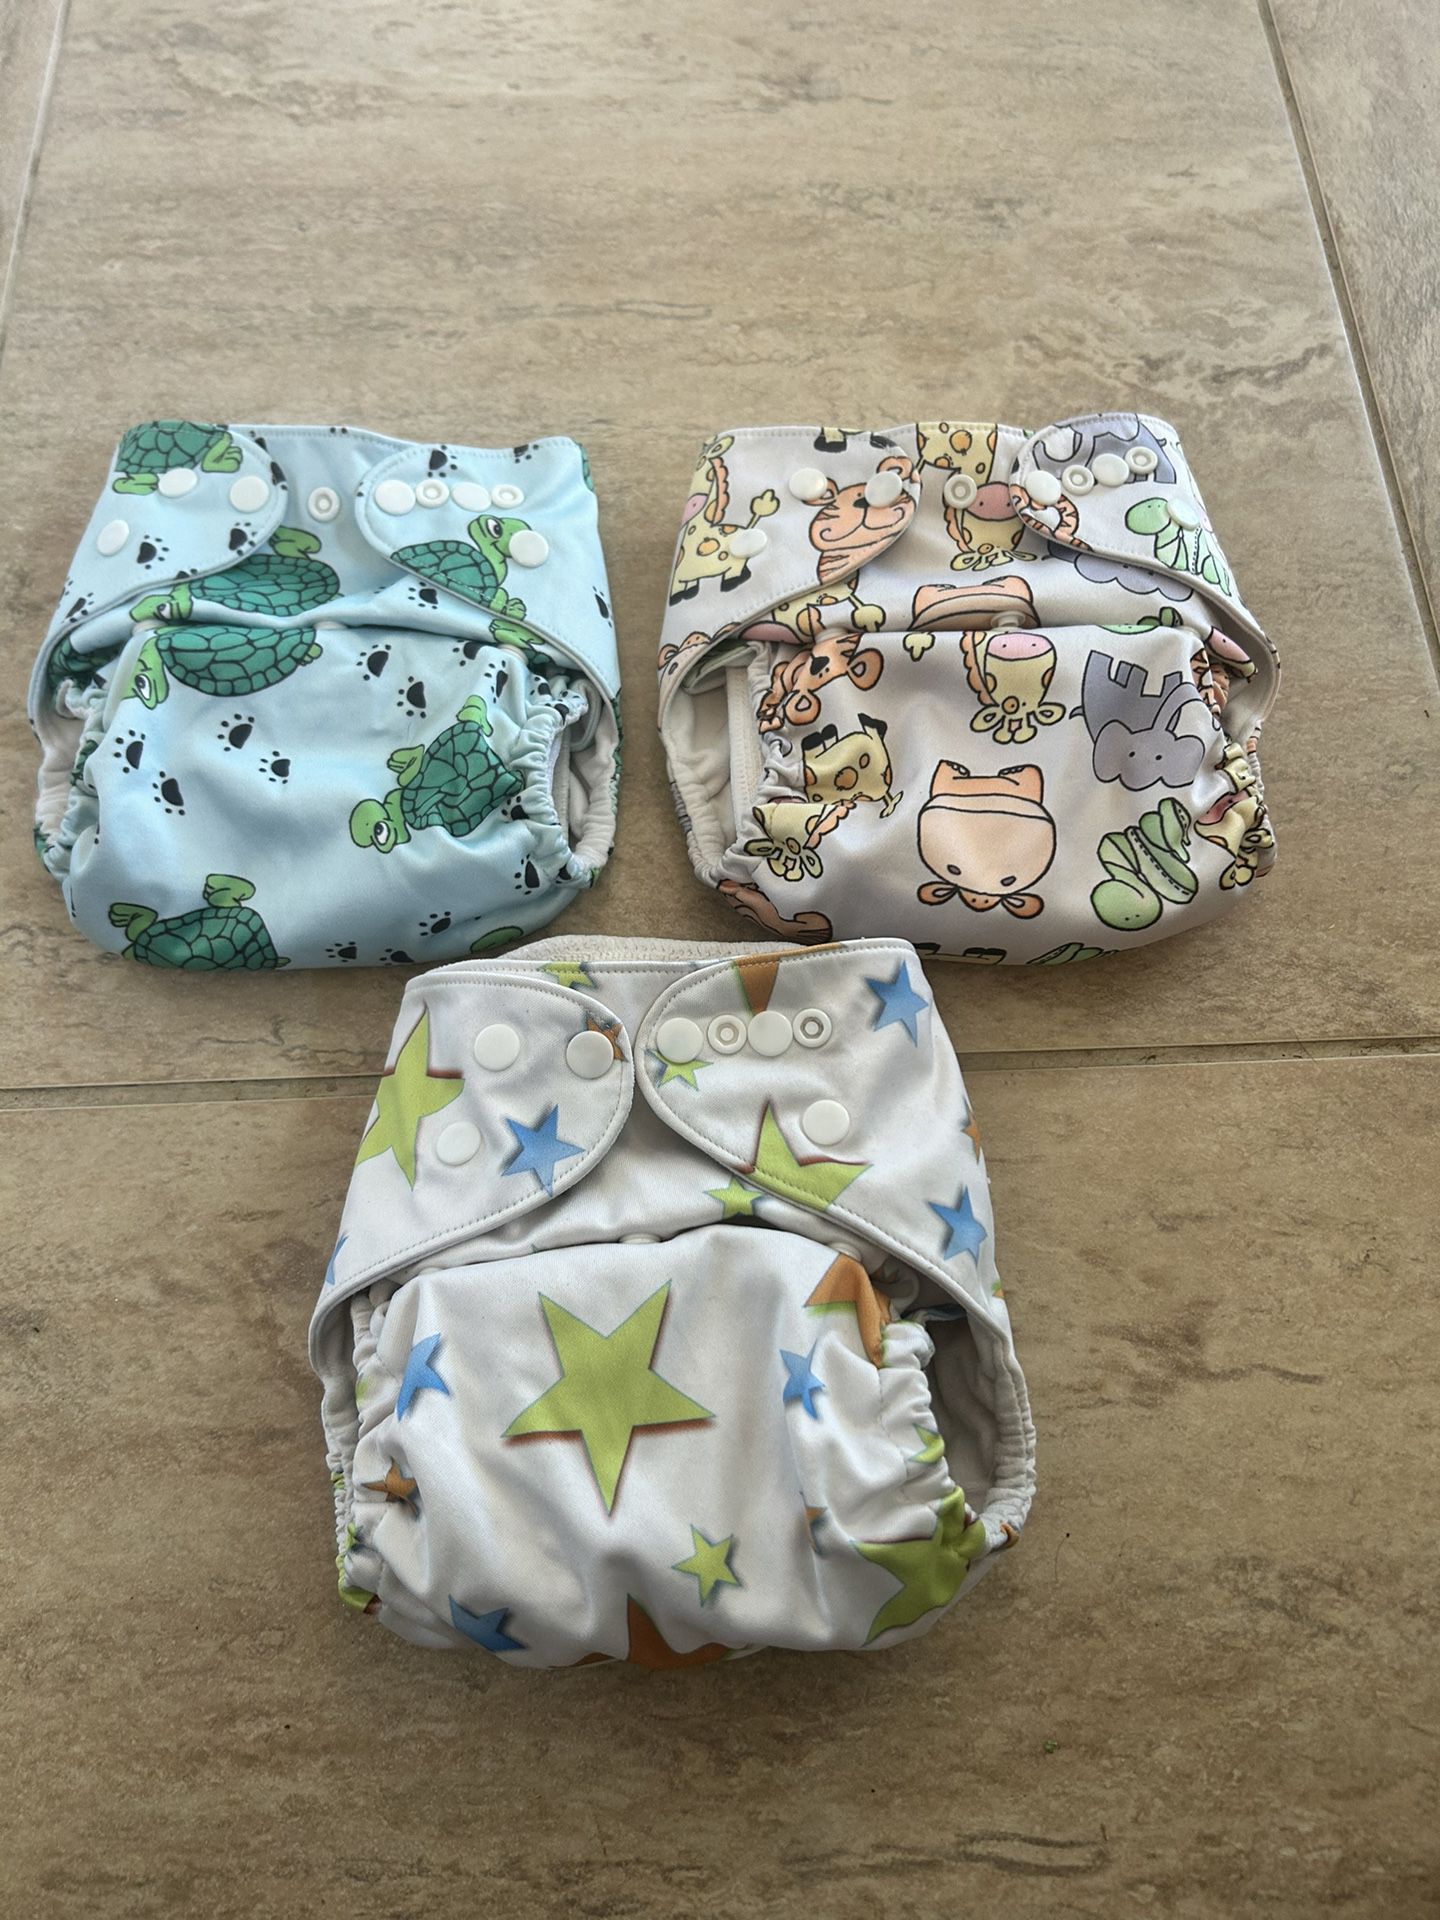 Set of 3 JustSimplyBaby Washable Cloth Diapers Plus 6 Inserts (See Details)